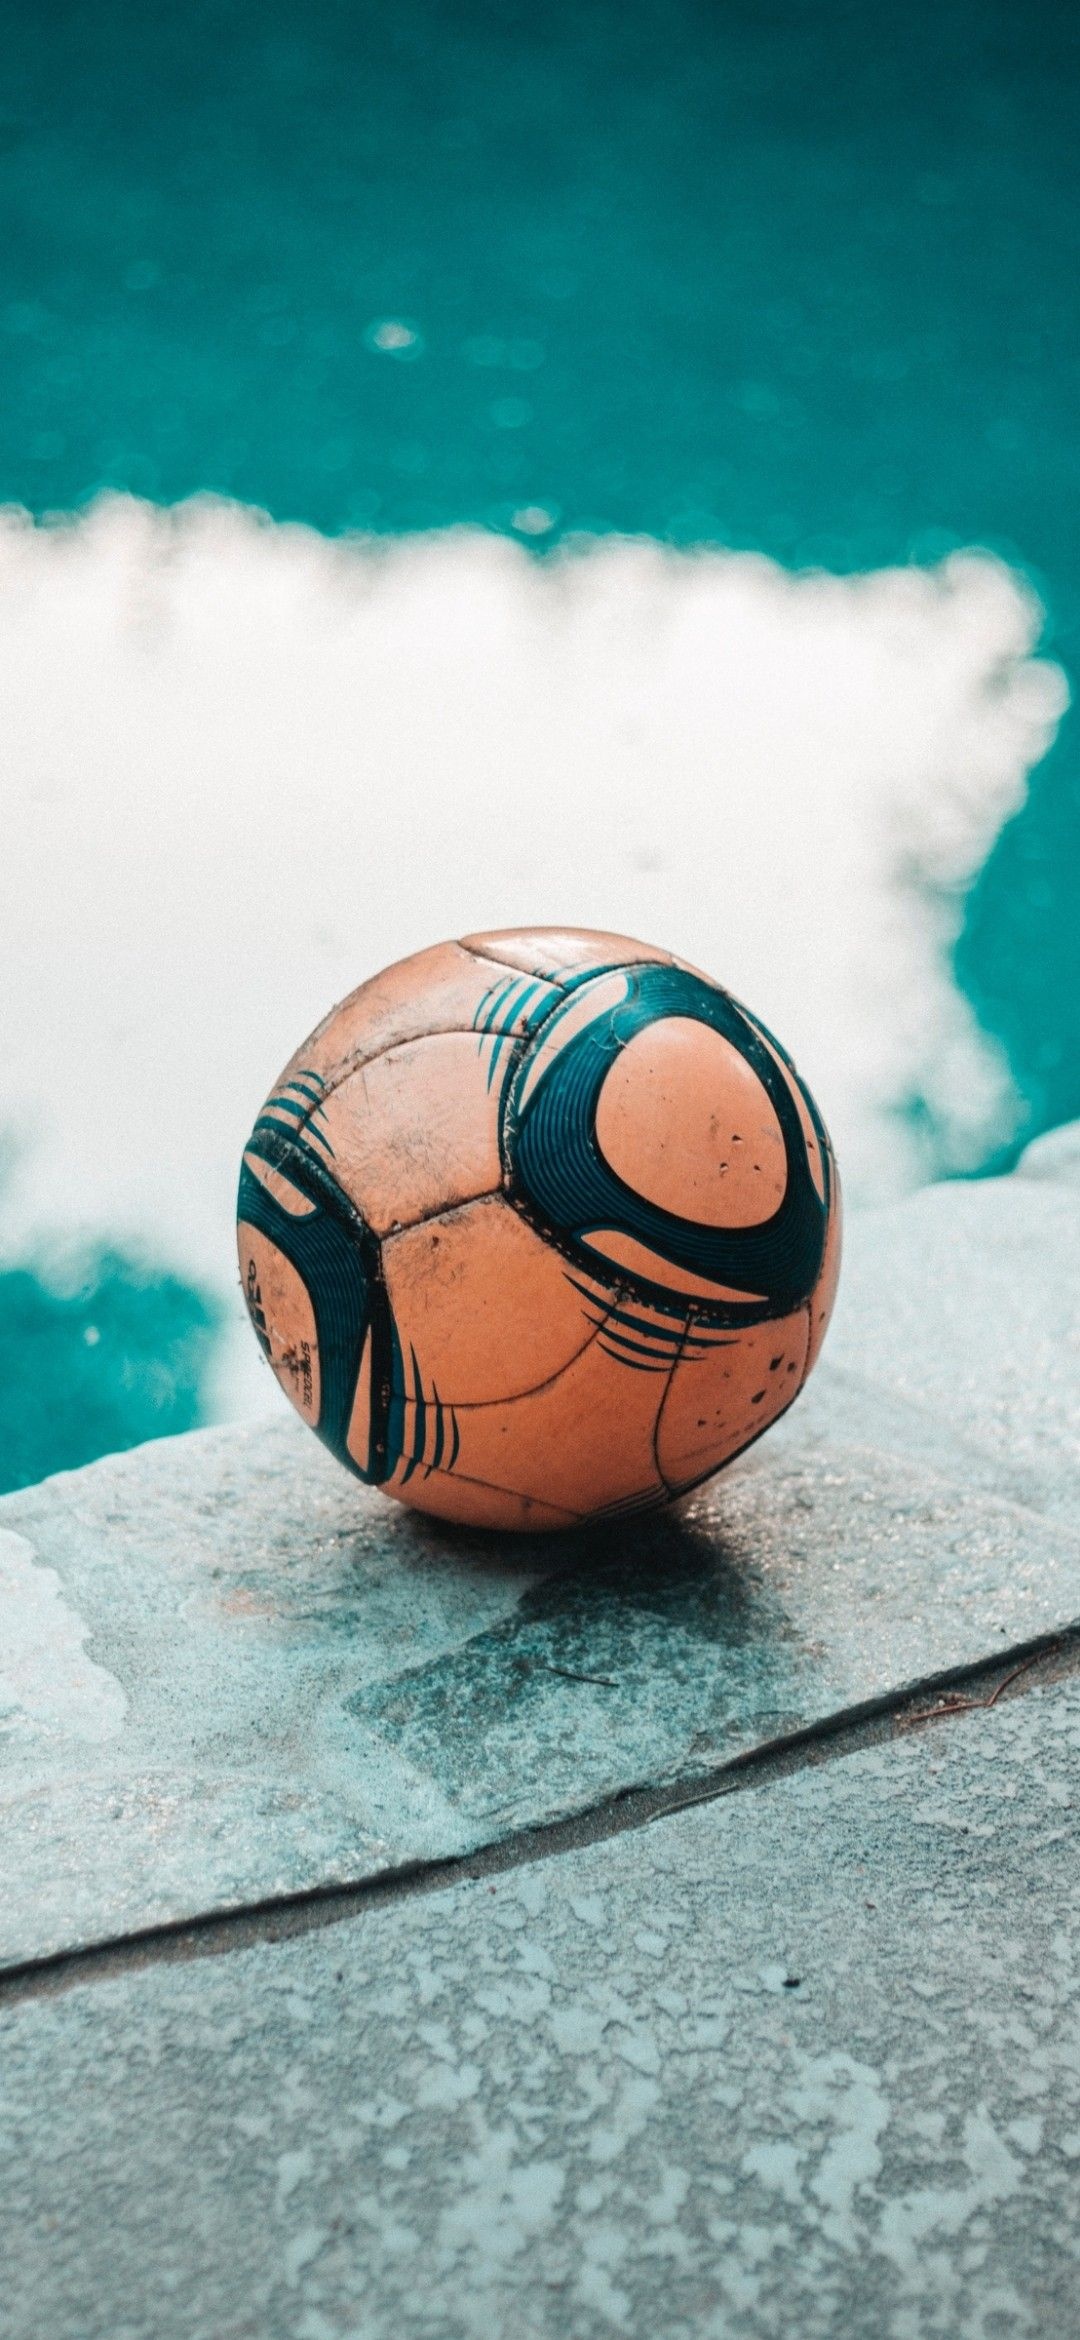 Soccer ball, Athletic sport, Football passion, Iconic design, 1080x2340 HD Handy